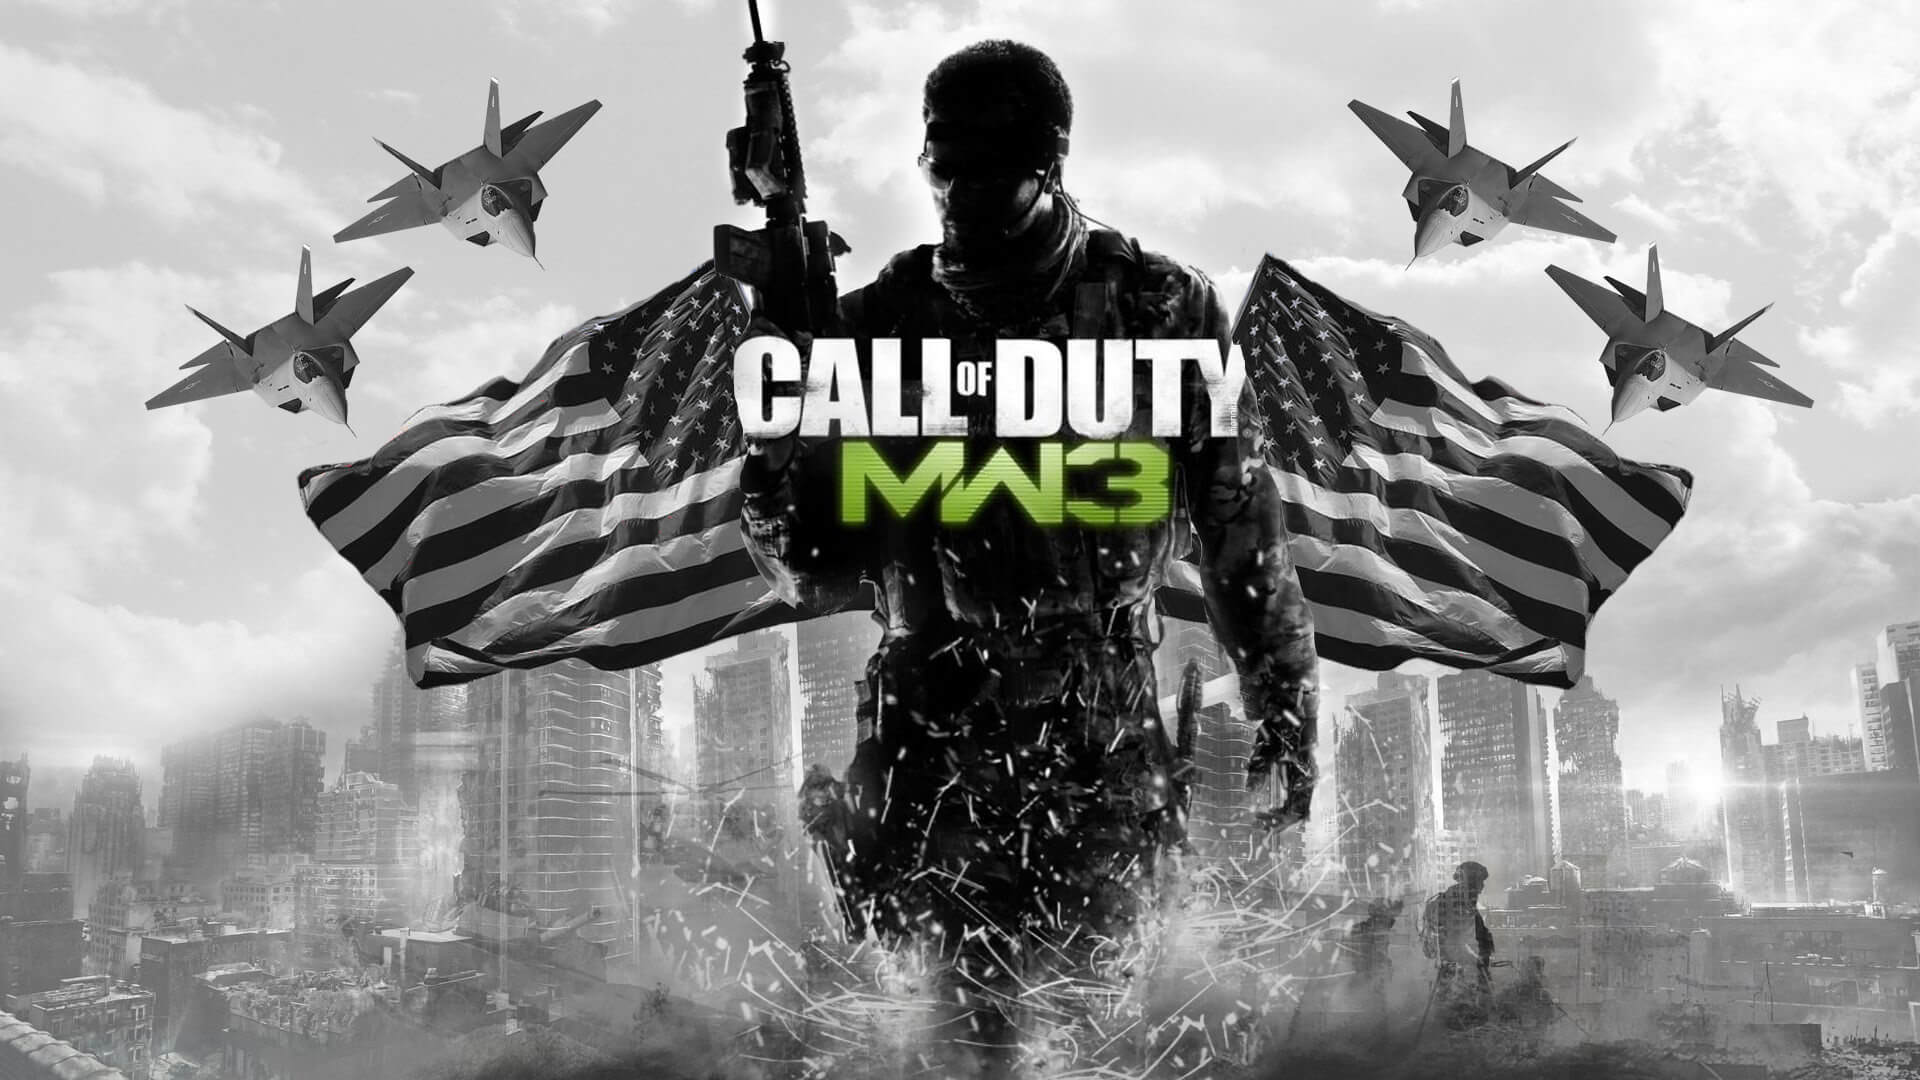 Call Of Duty Modern Warfare 3 Mods Pc Download [Extra Quality]